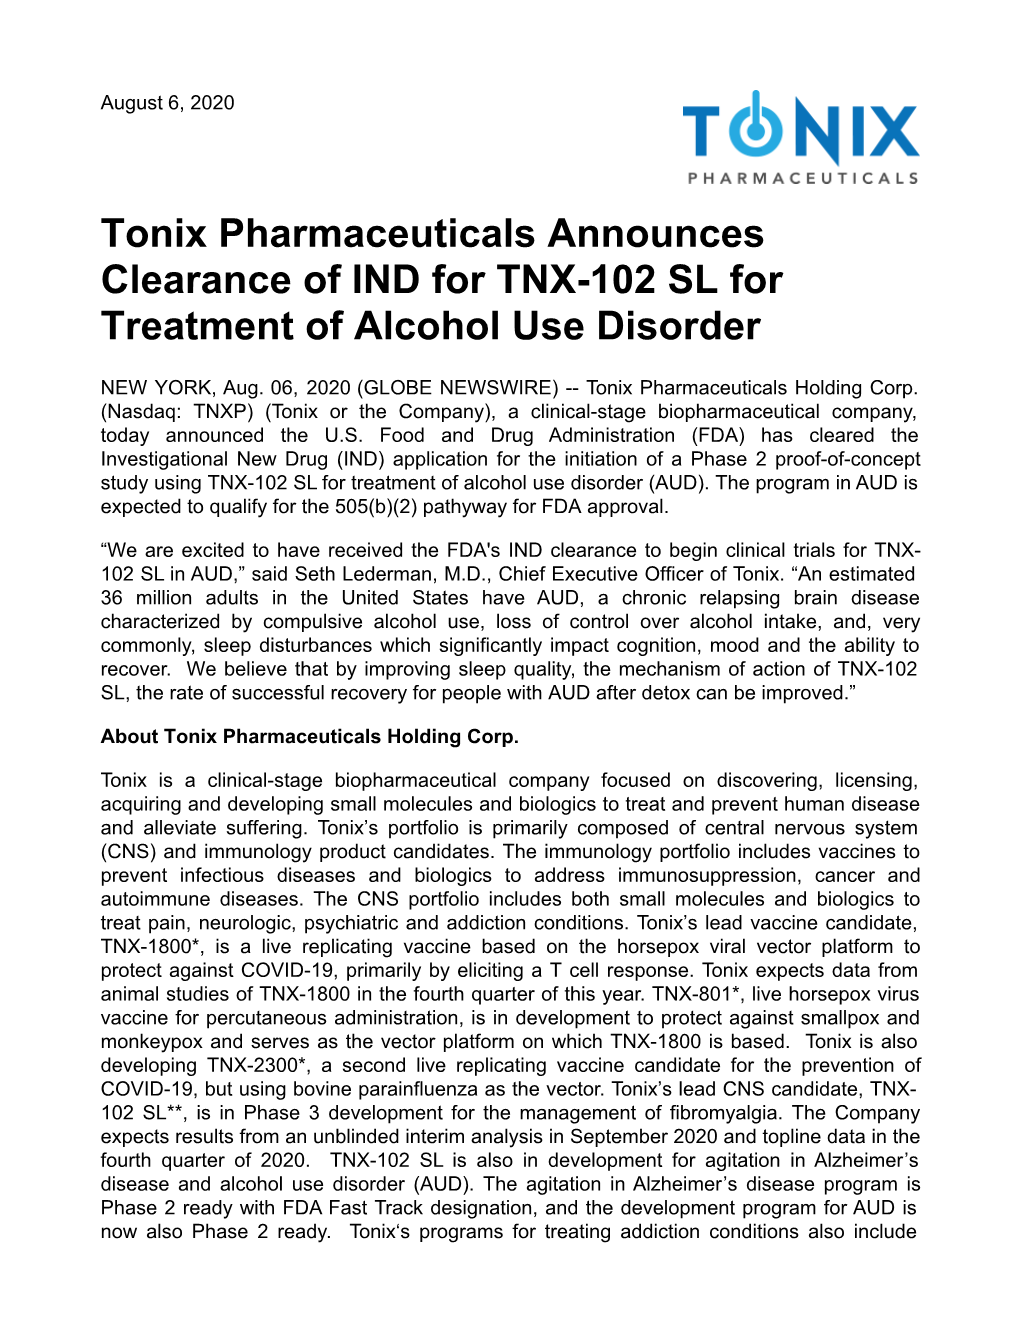 Tonix Pharmaceuticals Announces Clearance of IND for TNX-102 SL for Treatment of Alcohol Use Disorder